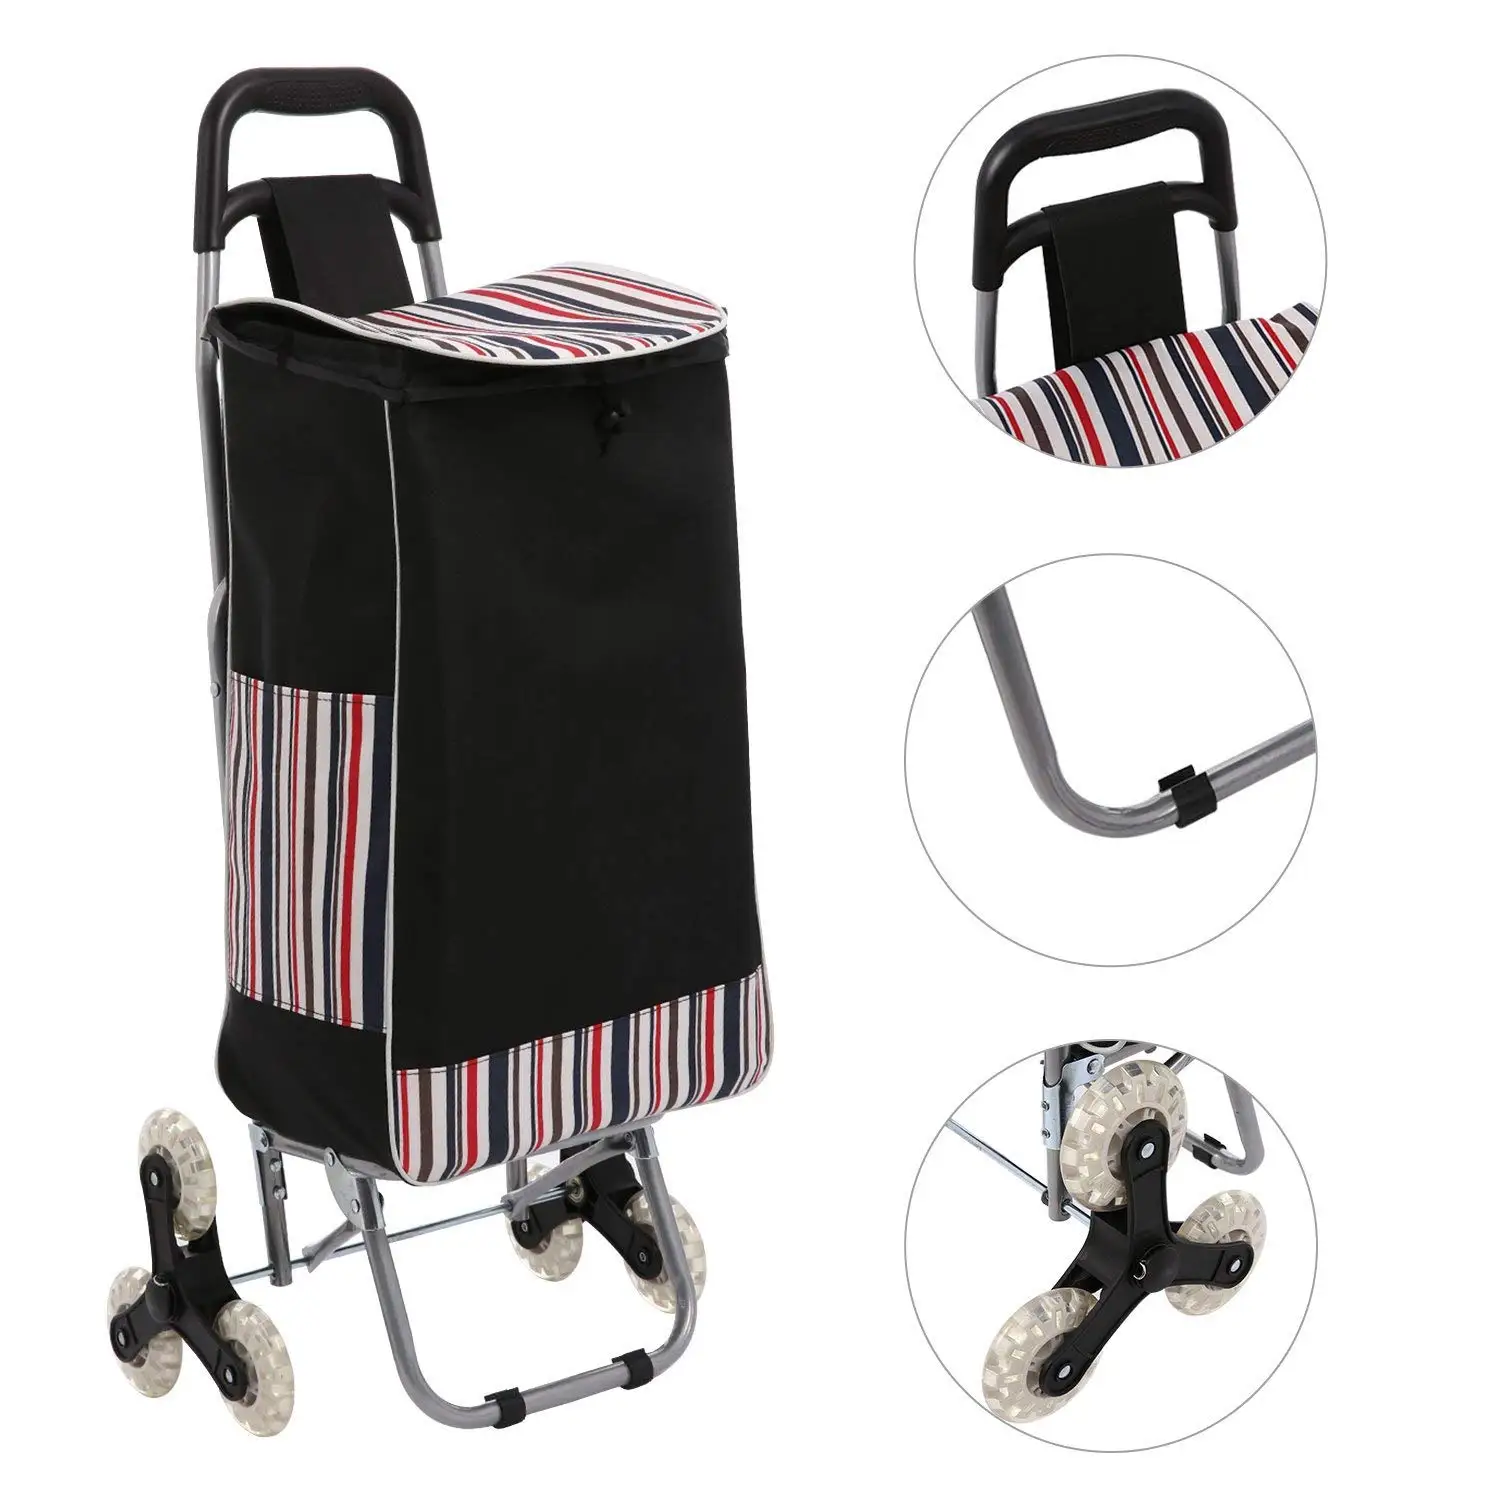 Go Up and Down Stairs 6Wheel Folding Shopping Trolley Lightweight Stair Climbing Cart with